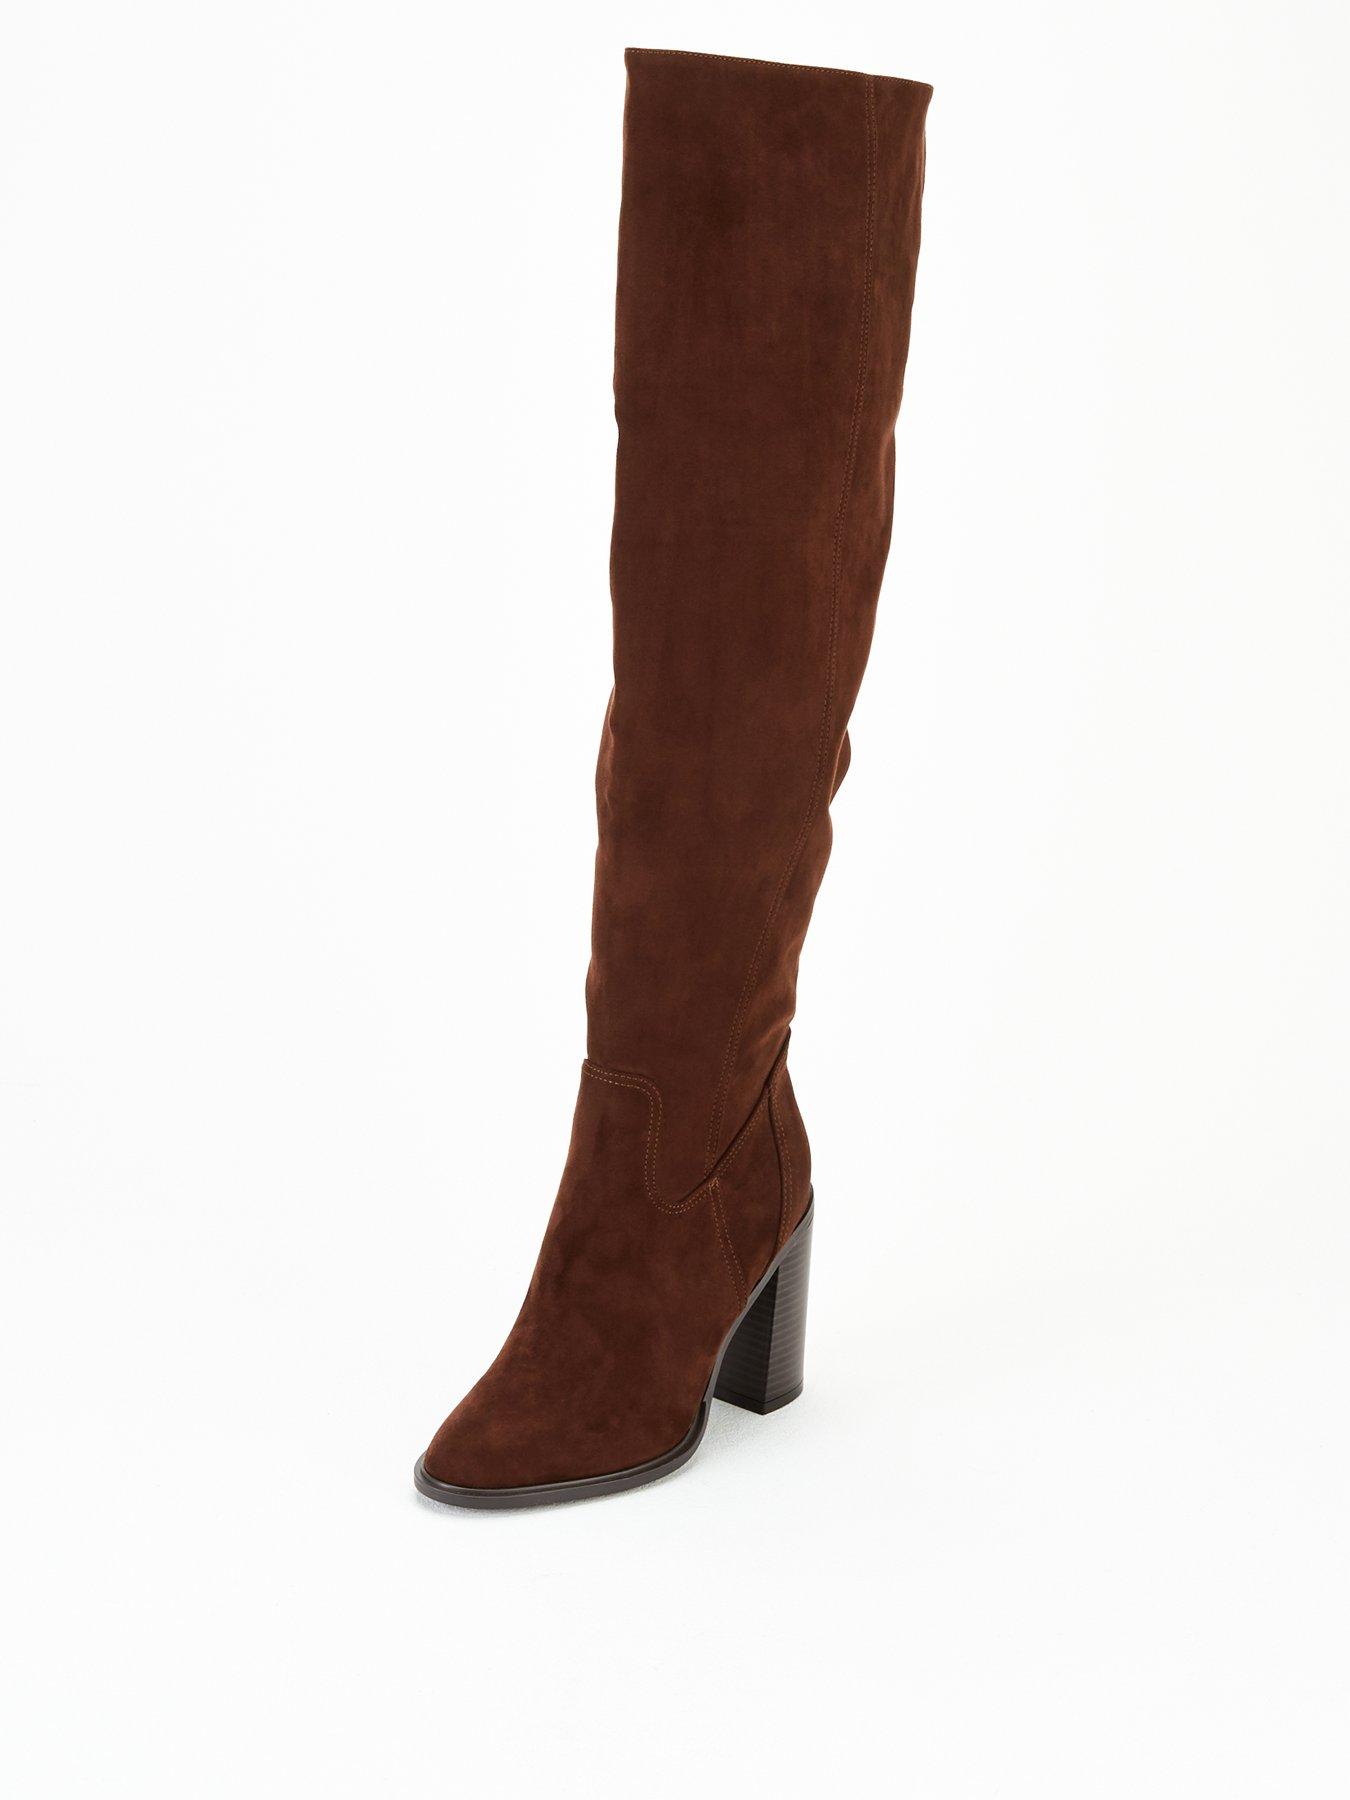 over the knee boots ireland